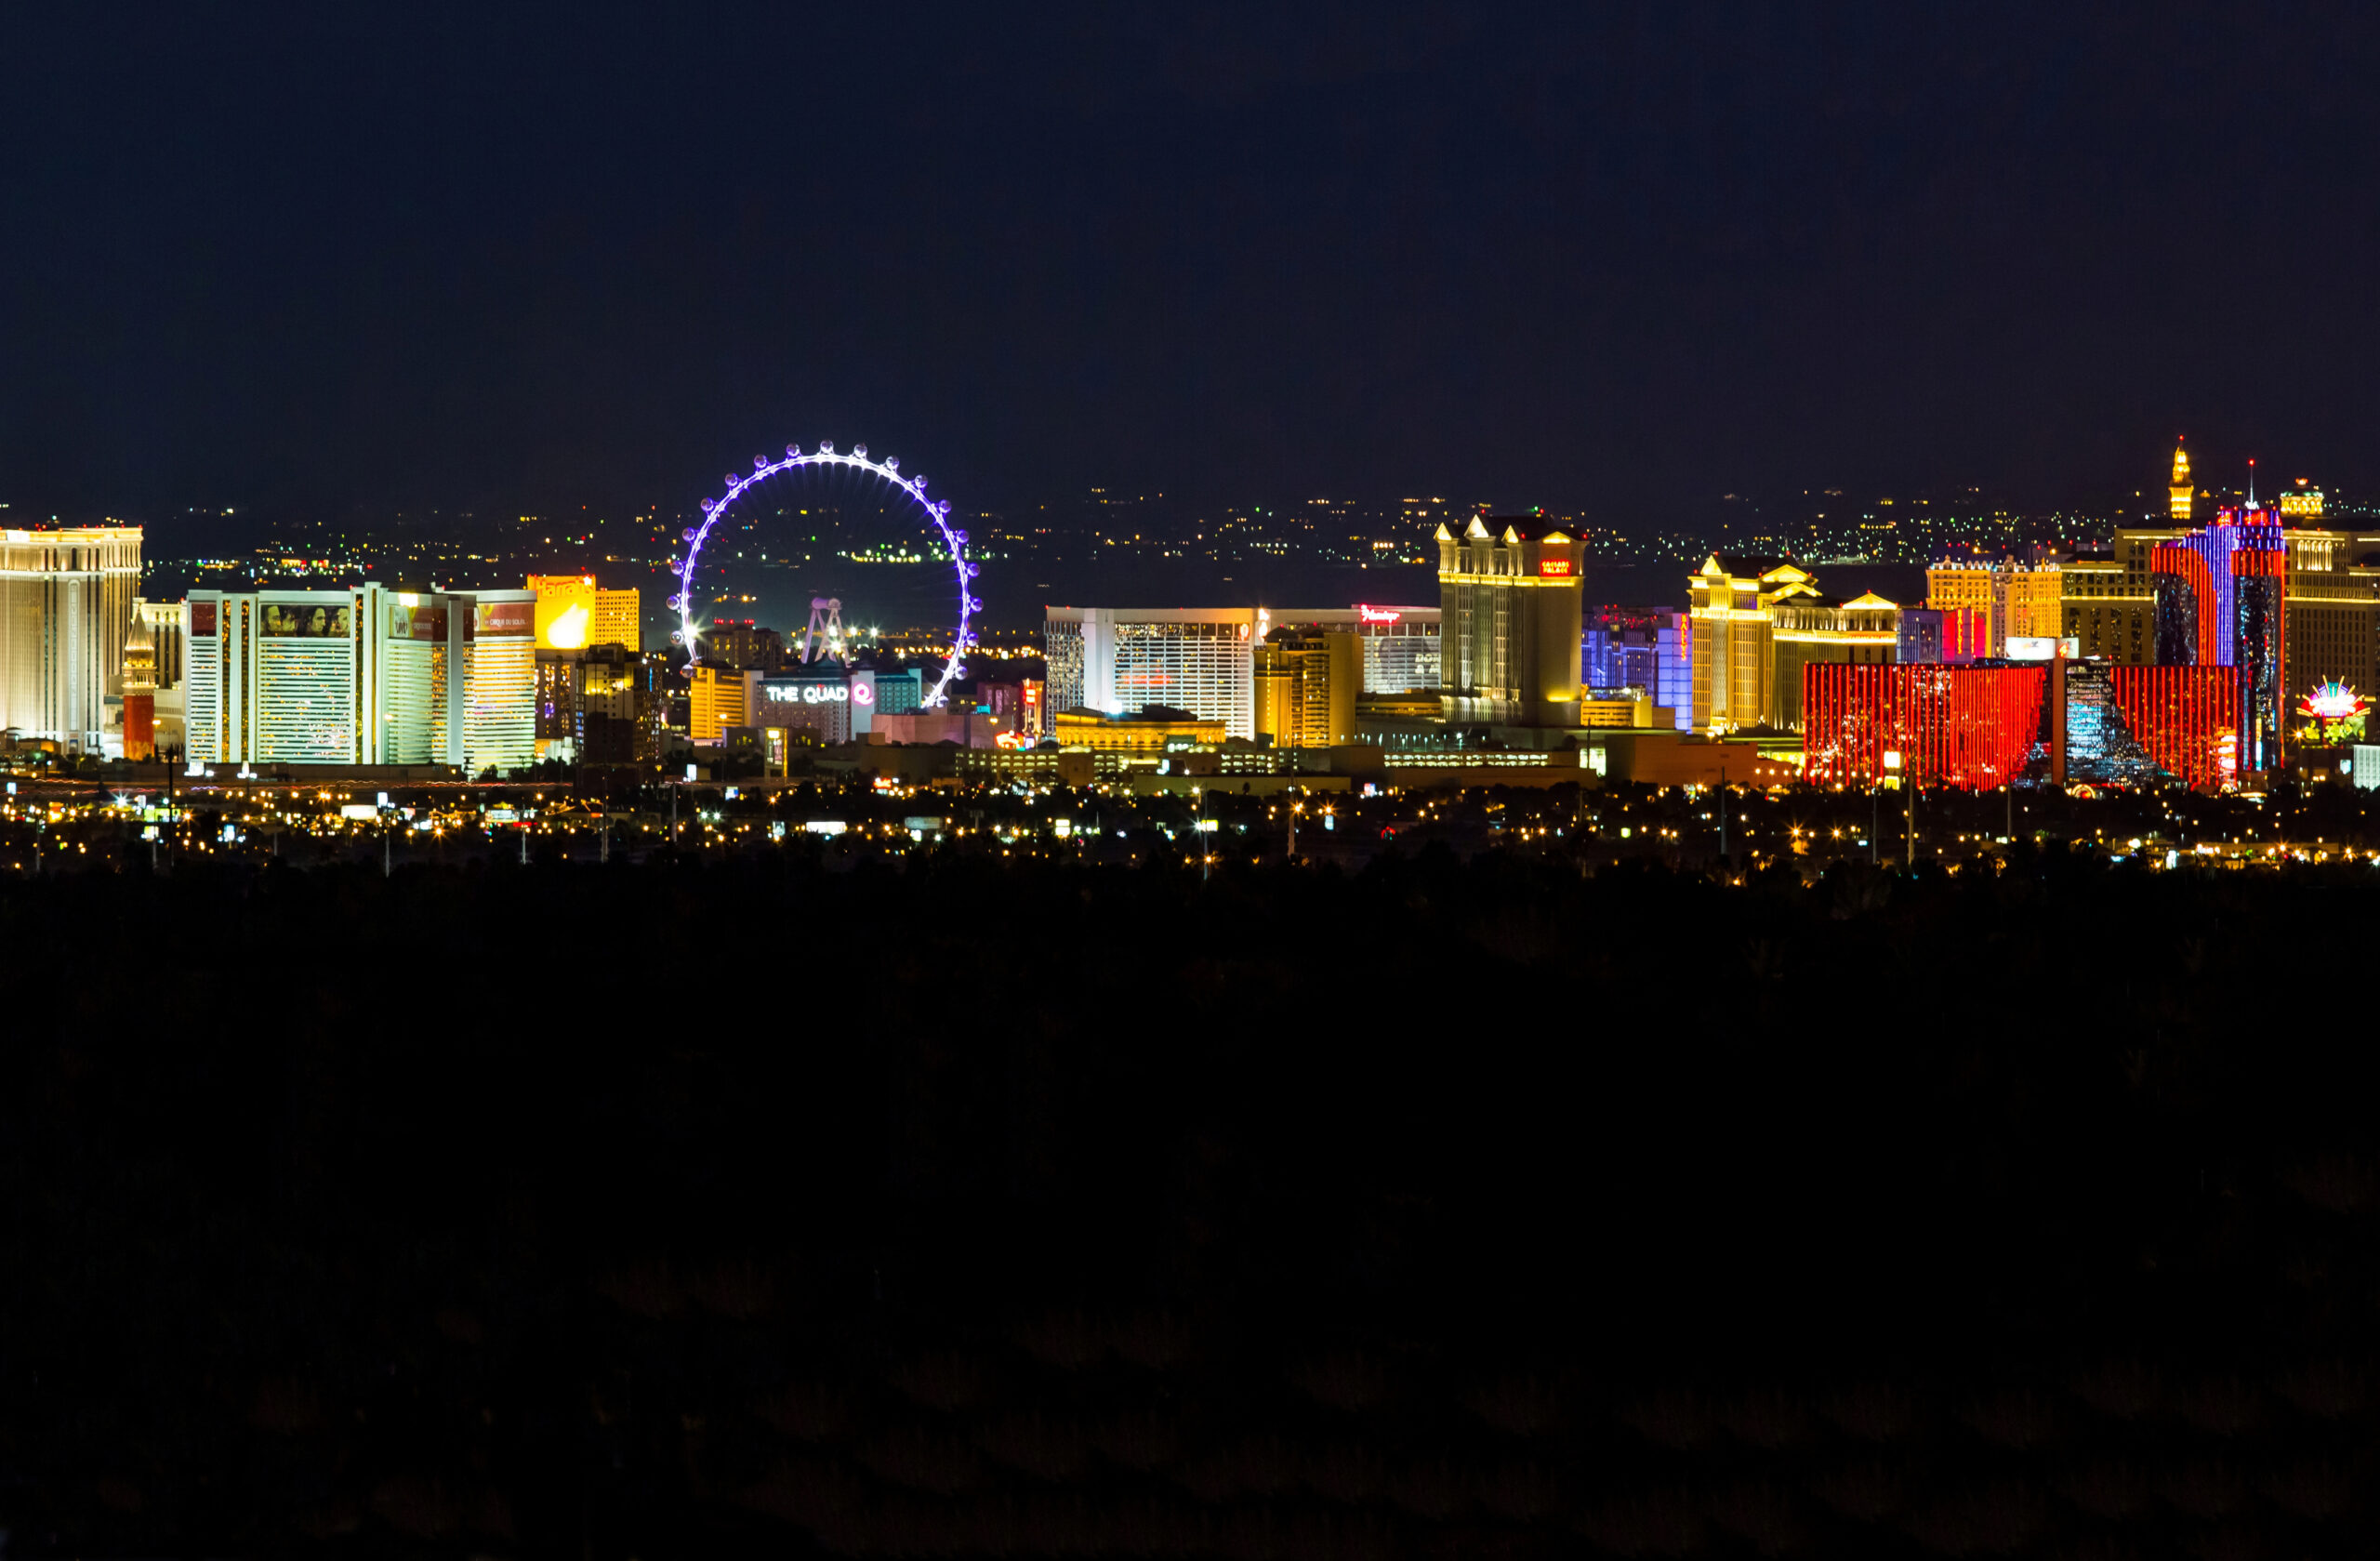 The High Roller dazzles the skyline illuminated by 2,000 LED lights.